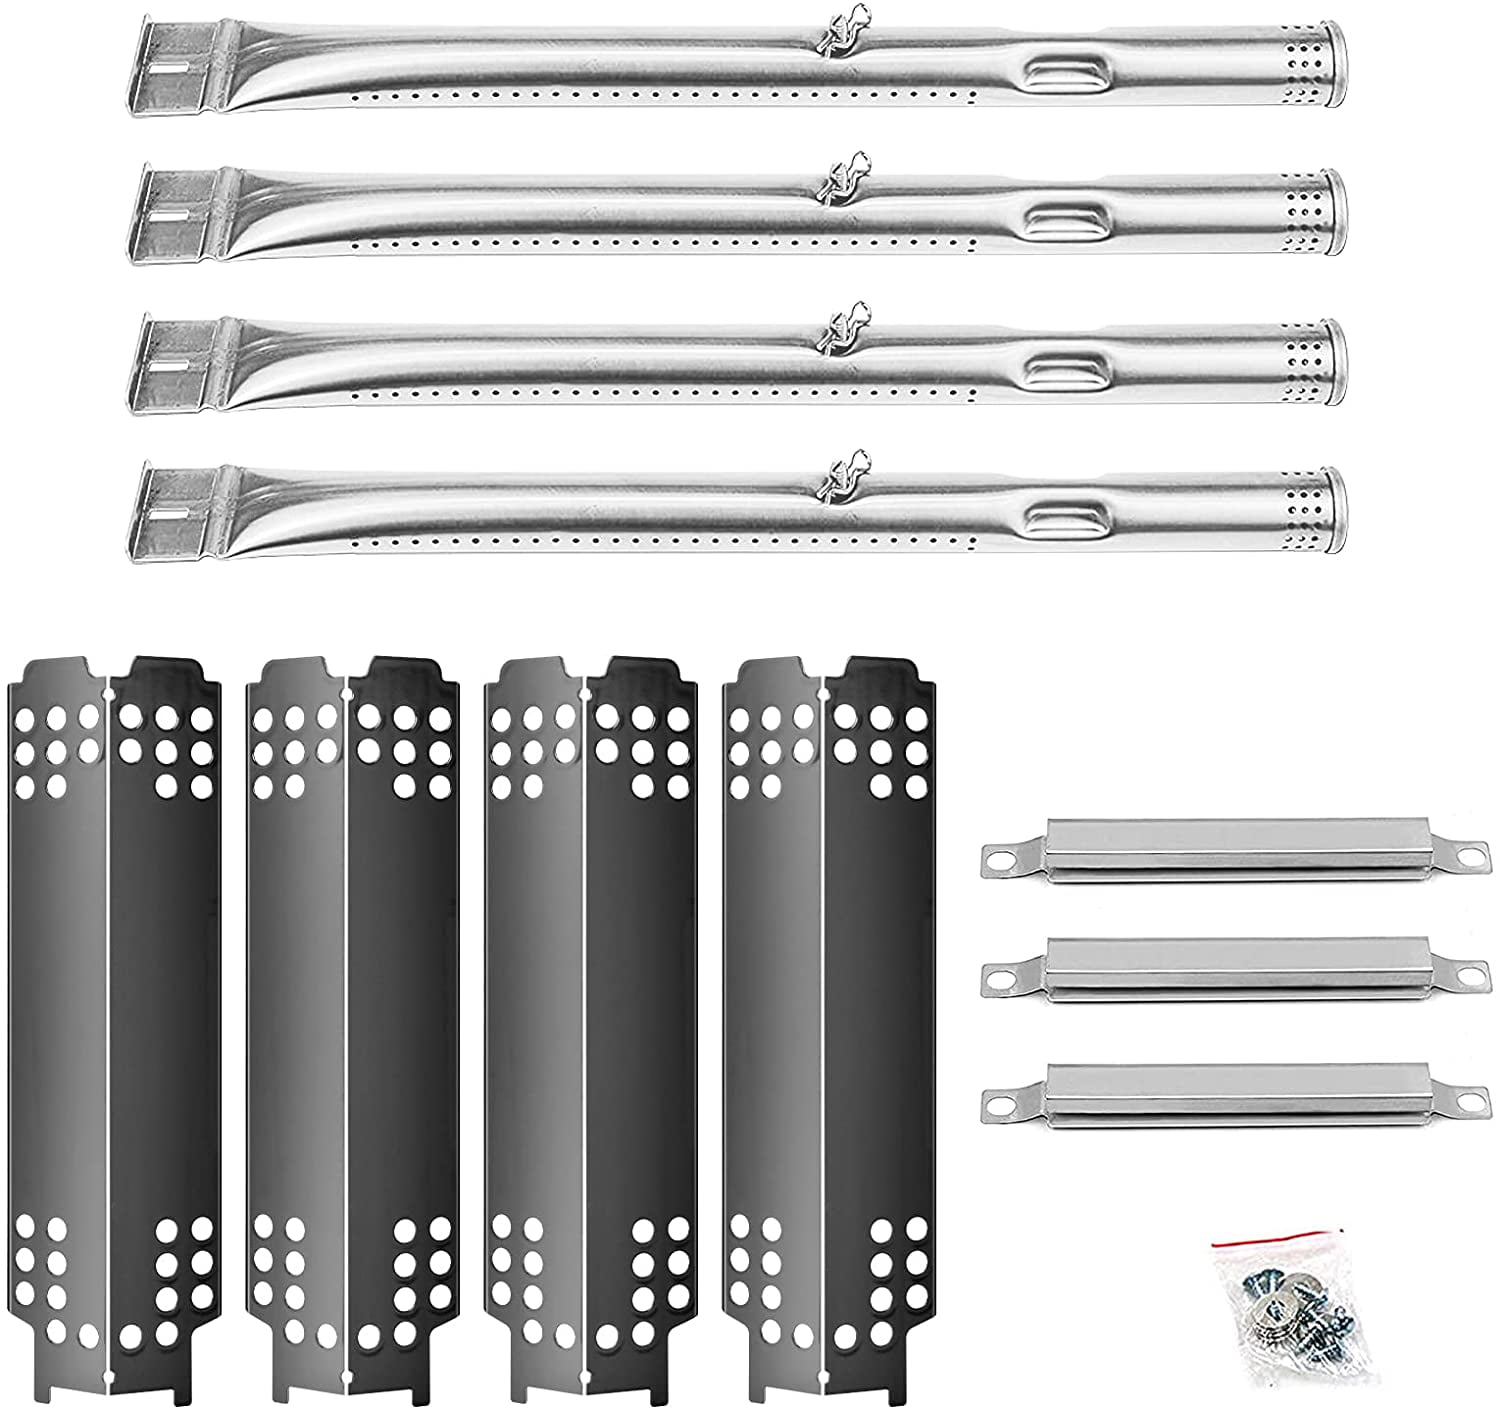 463436214, Grill Parts Kit for Charbroil 467300115 463436213 463436215 